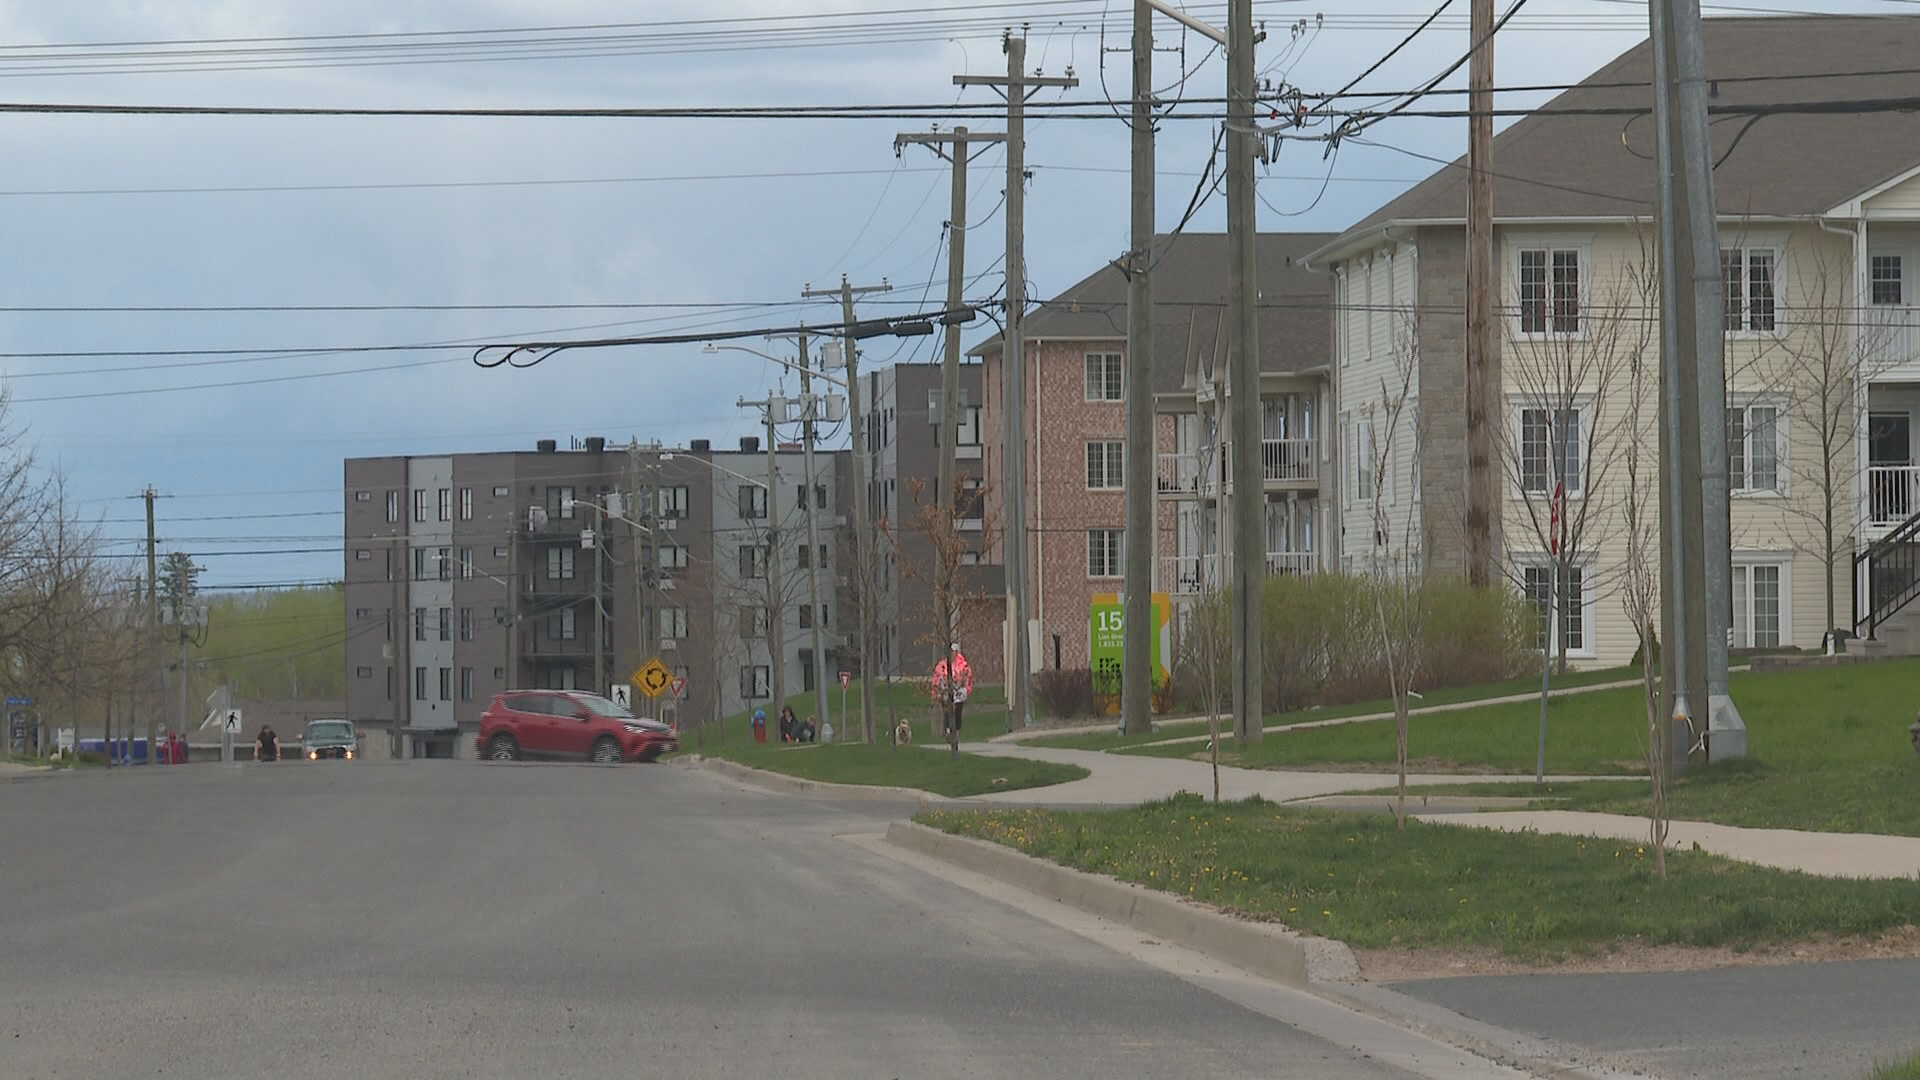 Cost of rent in New Brunswick continues to grow above target